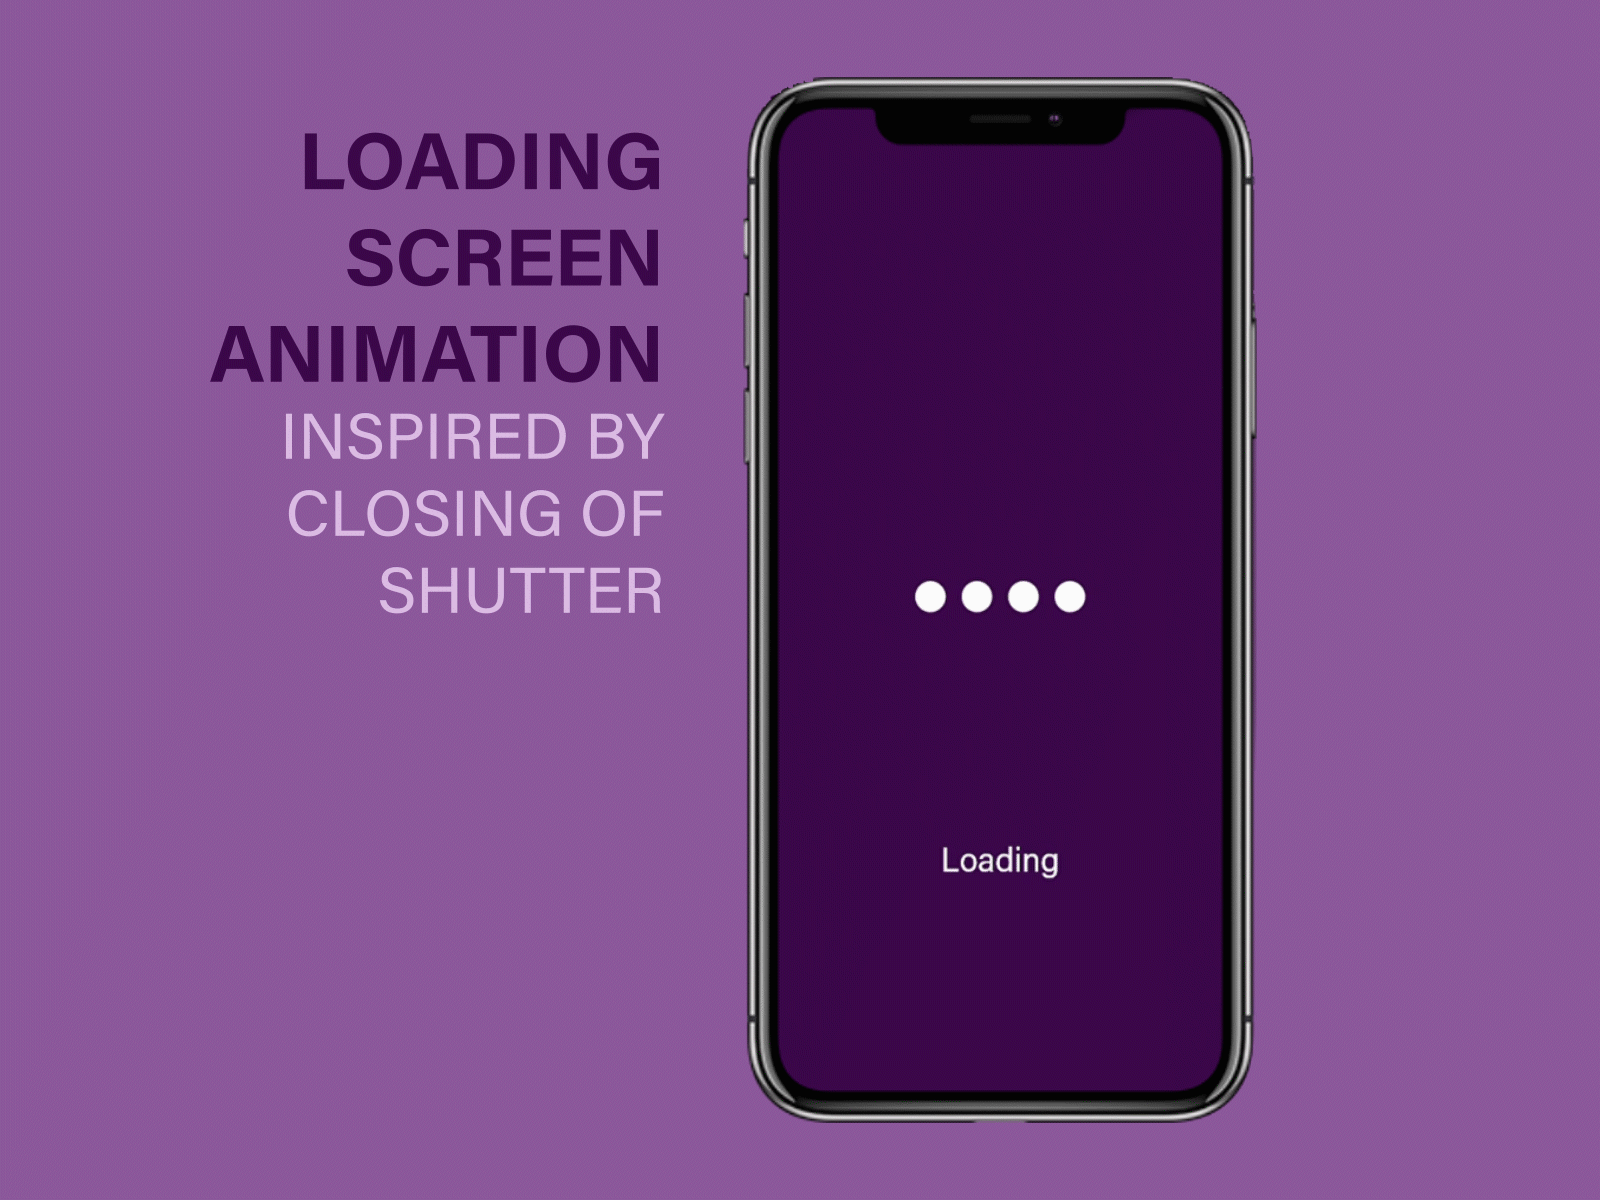 Loading Screen Animation adobe aftereffects aftereffects animated gif loading page loading screen loading screen animation motiongraphics ui animation ui design ui motion